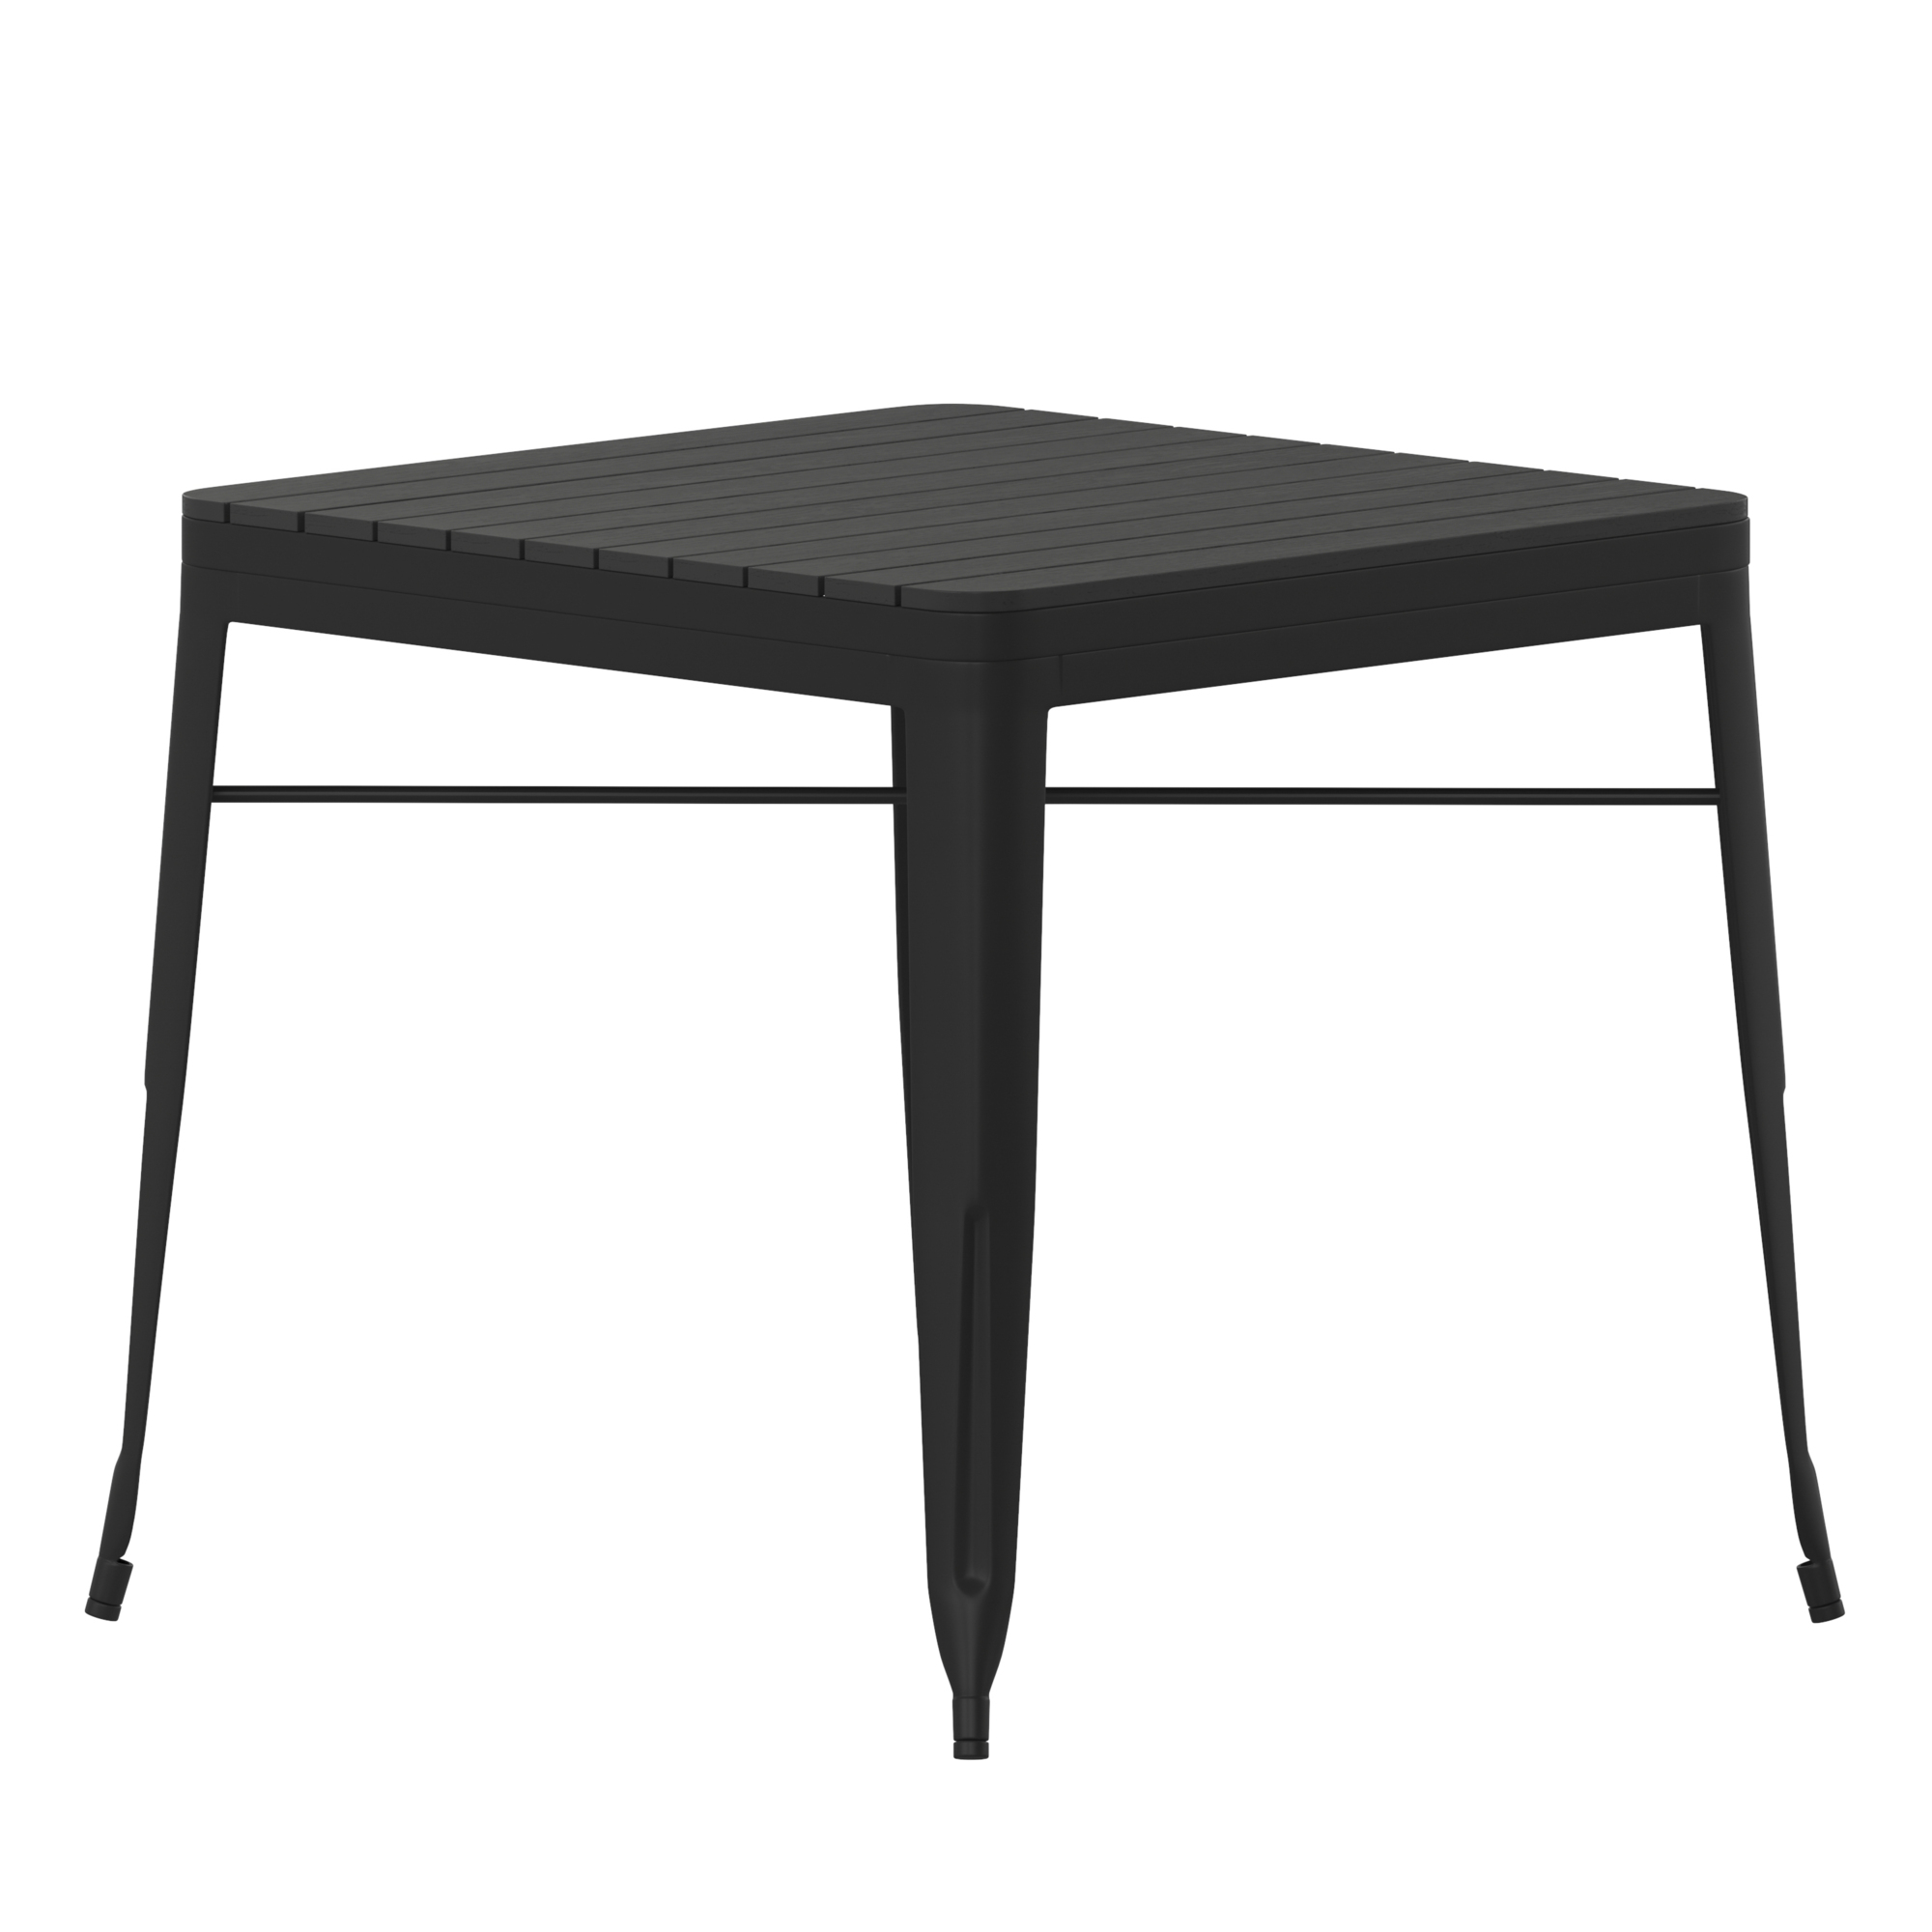 Flash Furniture, Black Patio Table with Poly Resin Slatted Top, Table Shape Square, Primary Color Black, Height 28.25 in, Model SBT11TBK